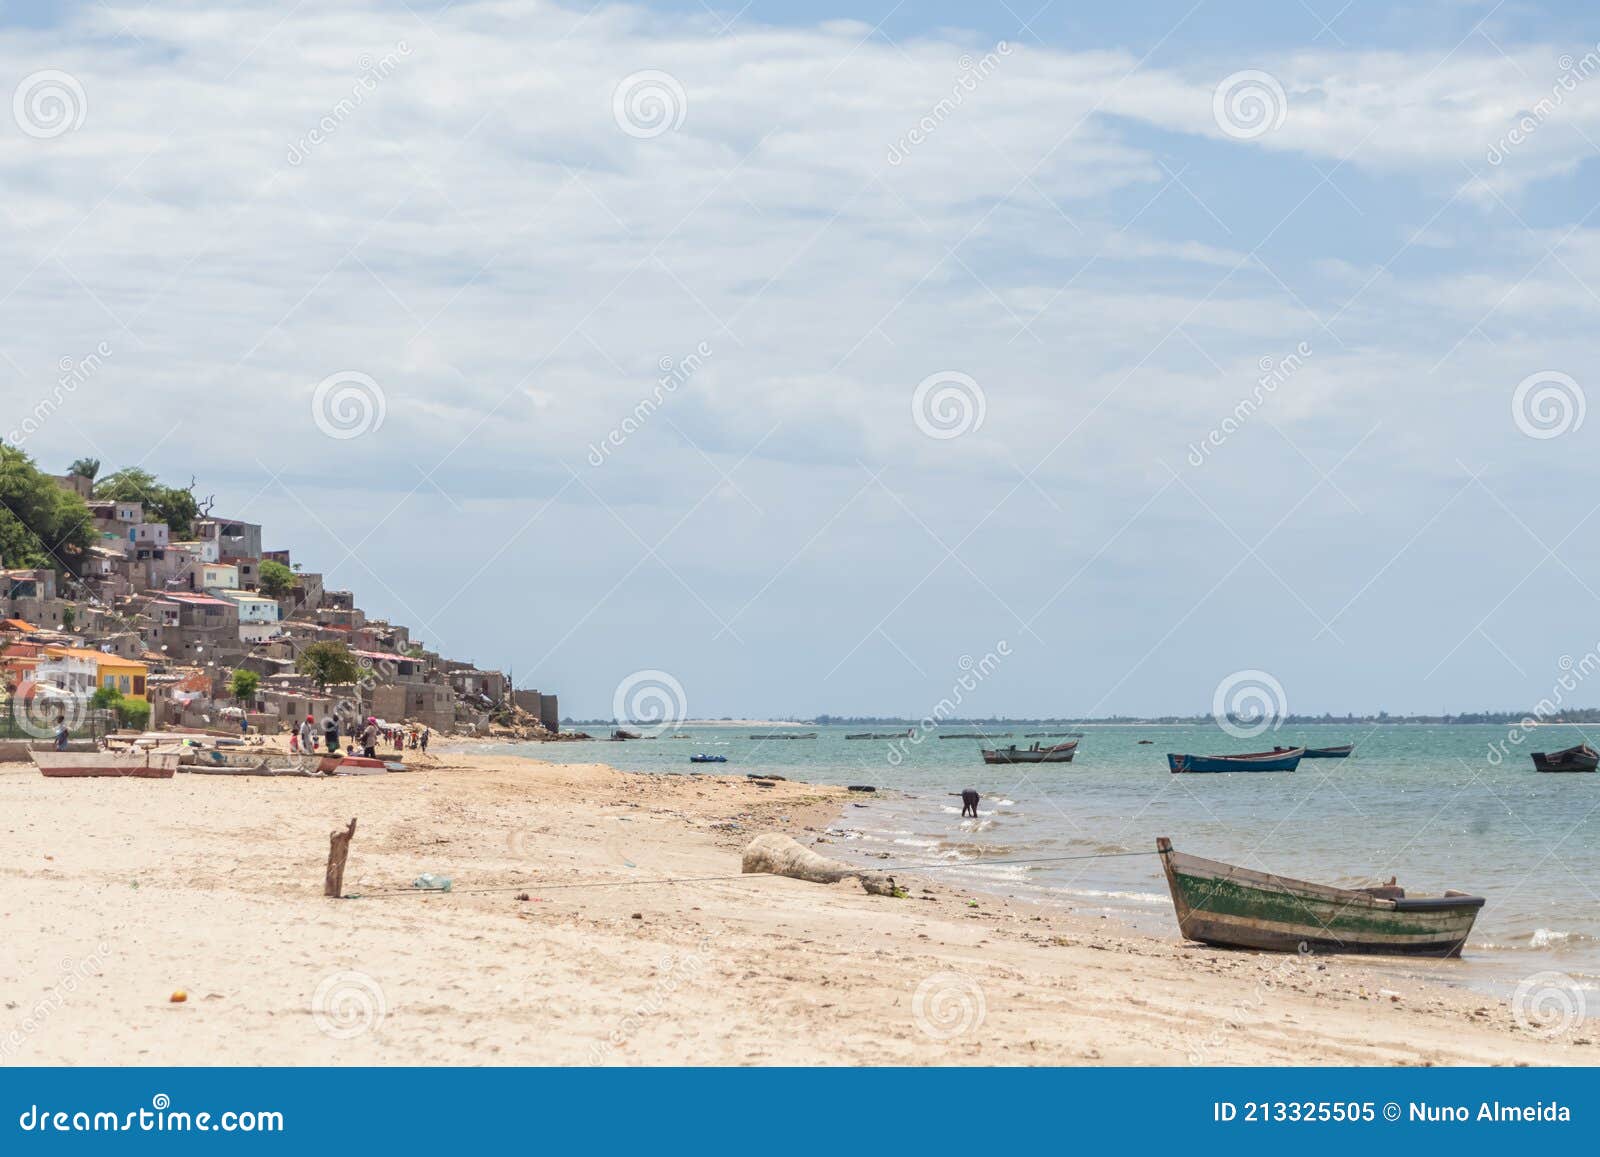 Beach View with Fishermen and Traditional Angolan Boats, in Luanda